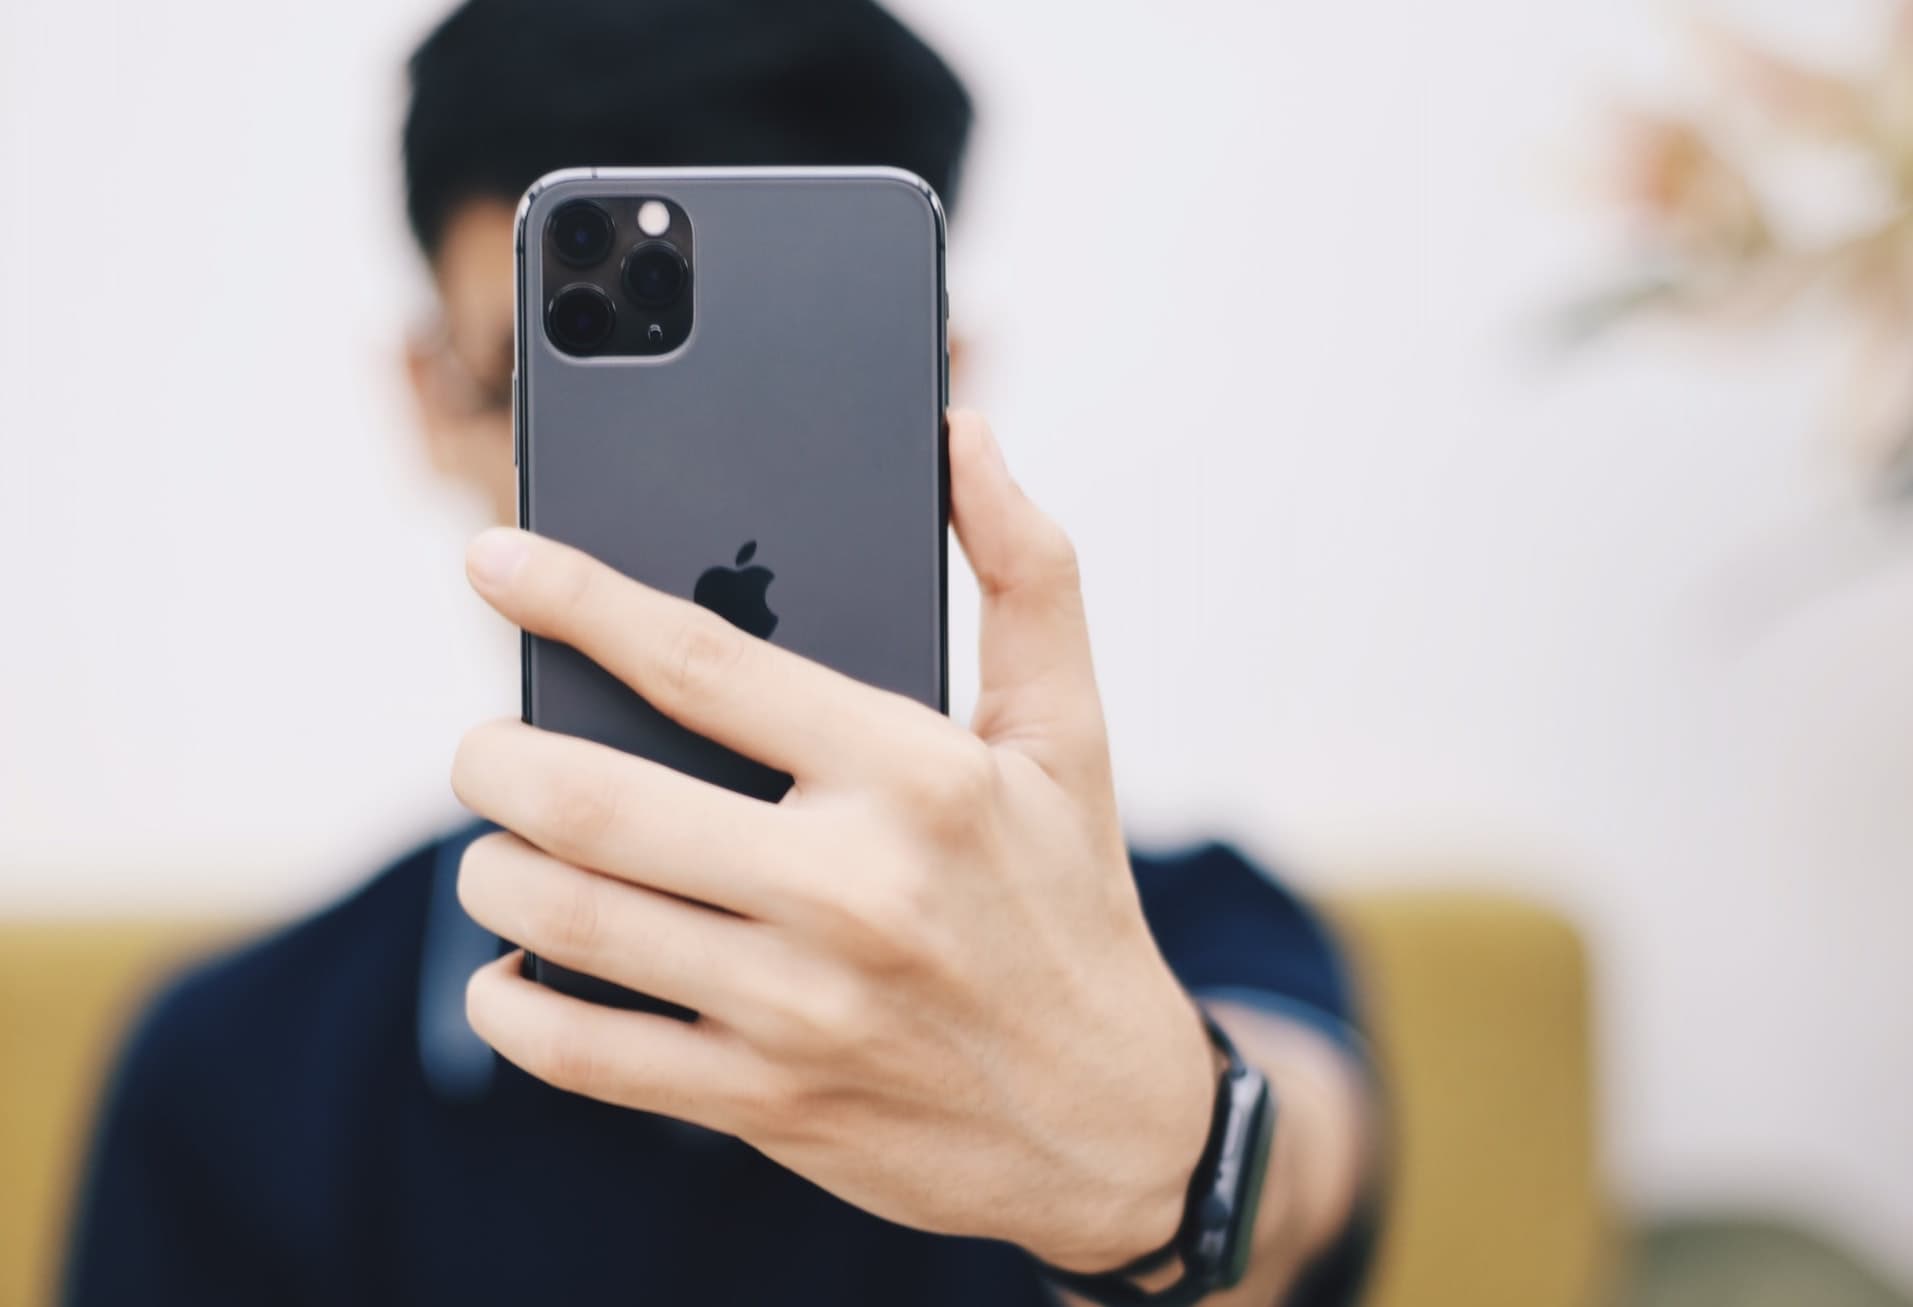 How To Take A Good Selfie With iPhone | CellularNews